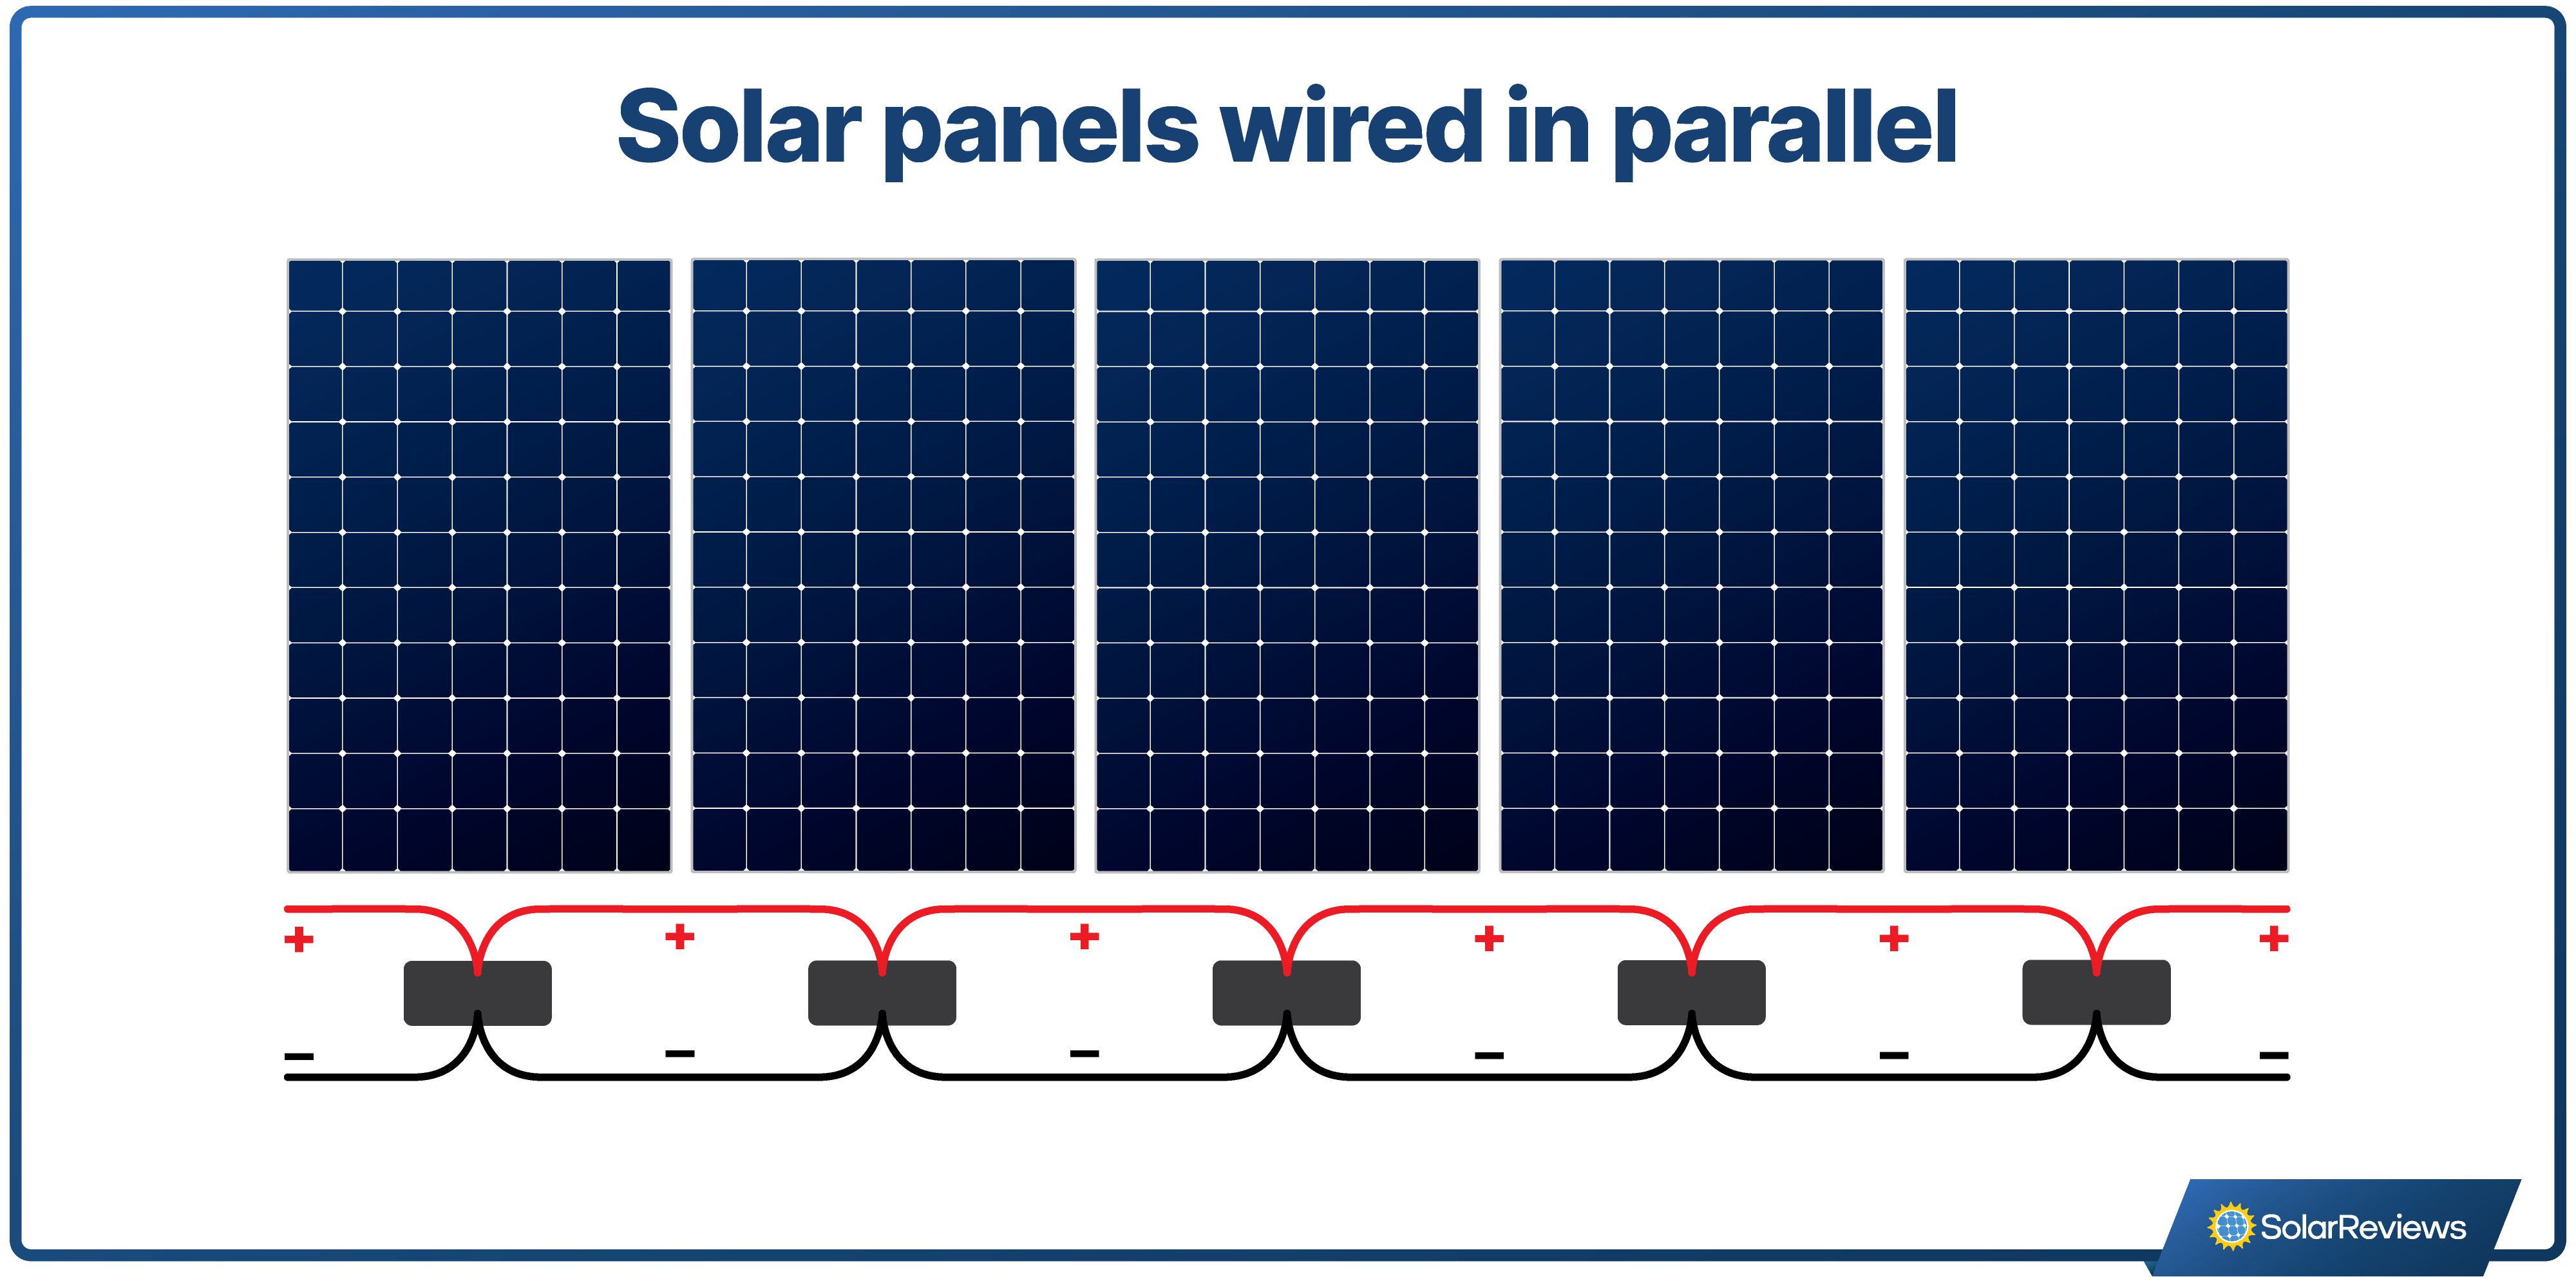 To wire solar panels in parallel, the positive terminal from one panel is connected to the positive terminal of another panel, while the negative terminals of the two panels are also connected.